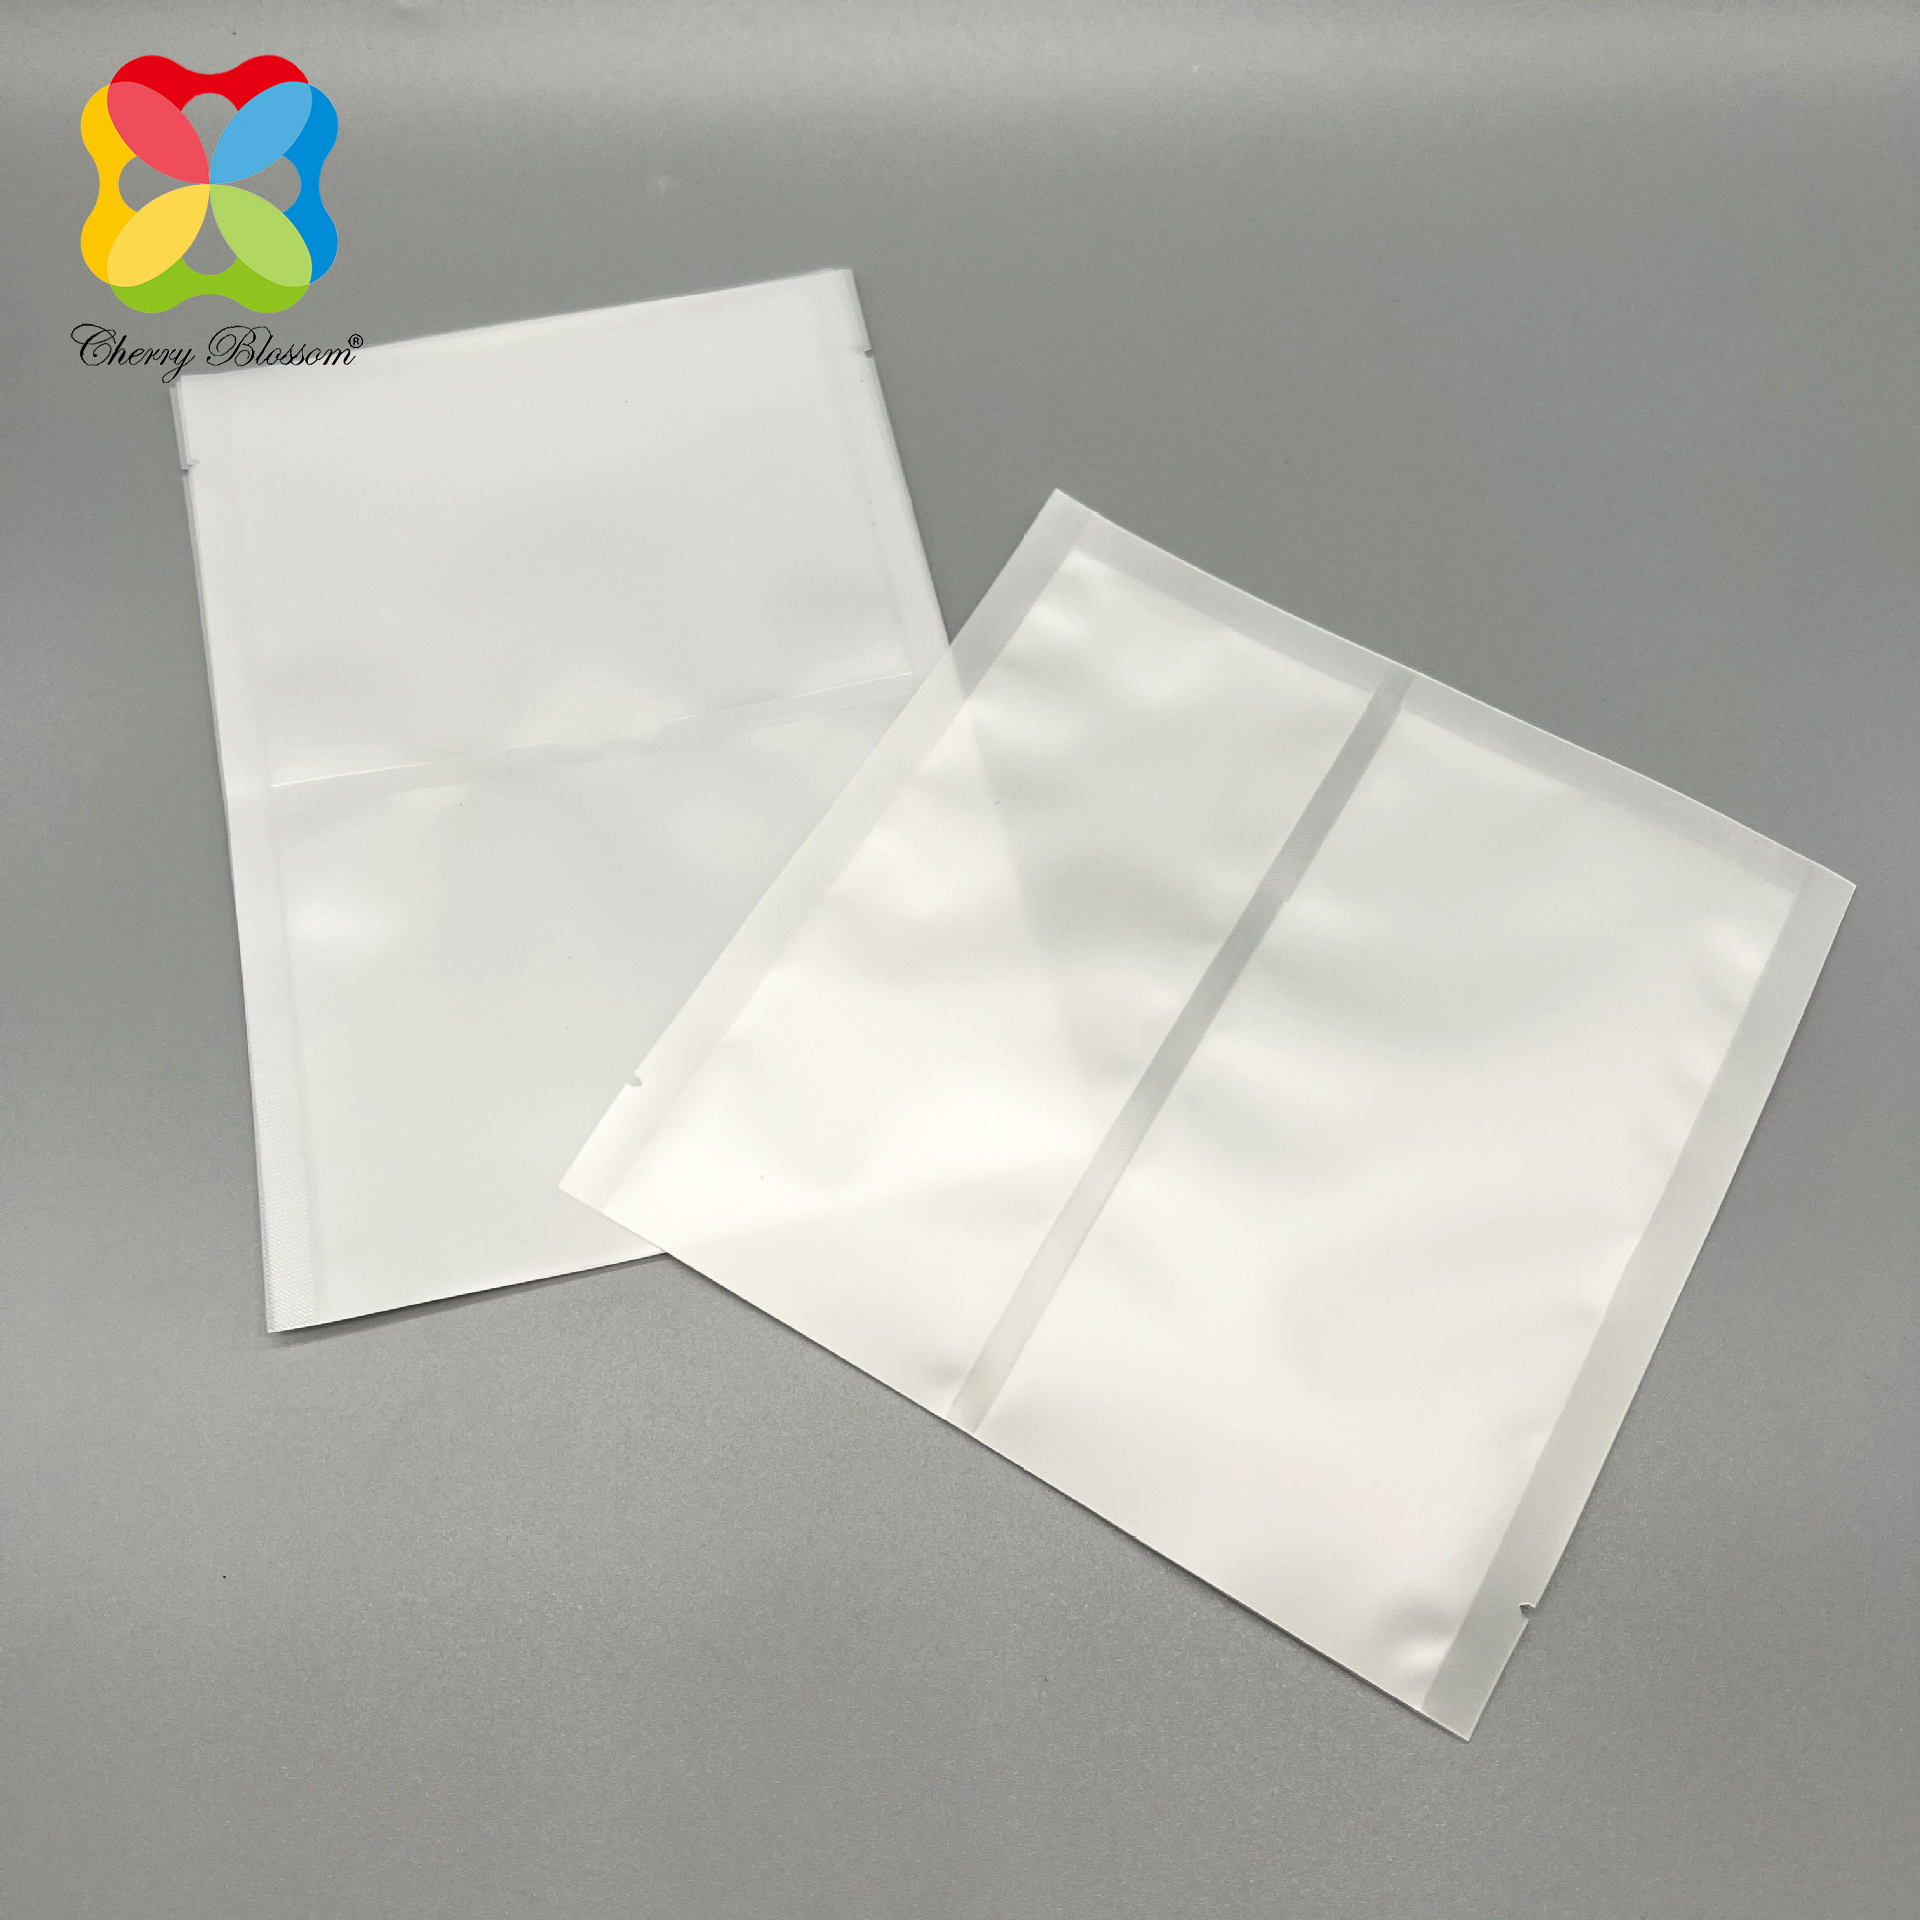 https://www.stblossom.com/custom-printed-two-in-one-dry-and-wet-separation-bag-food-packing-product/